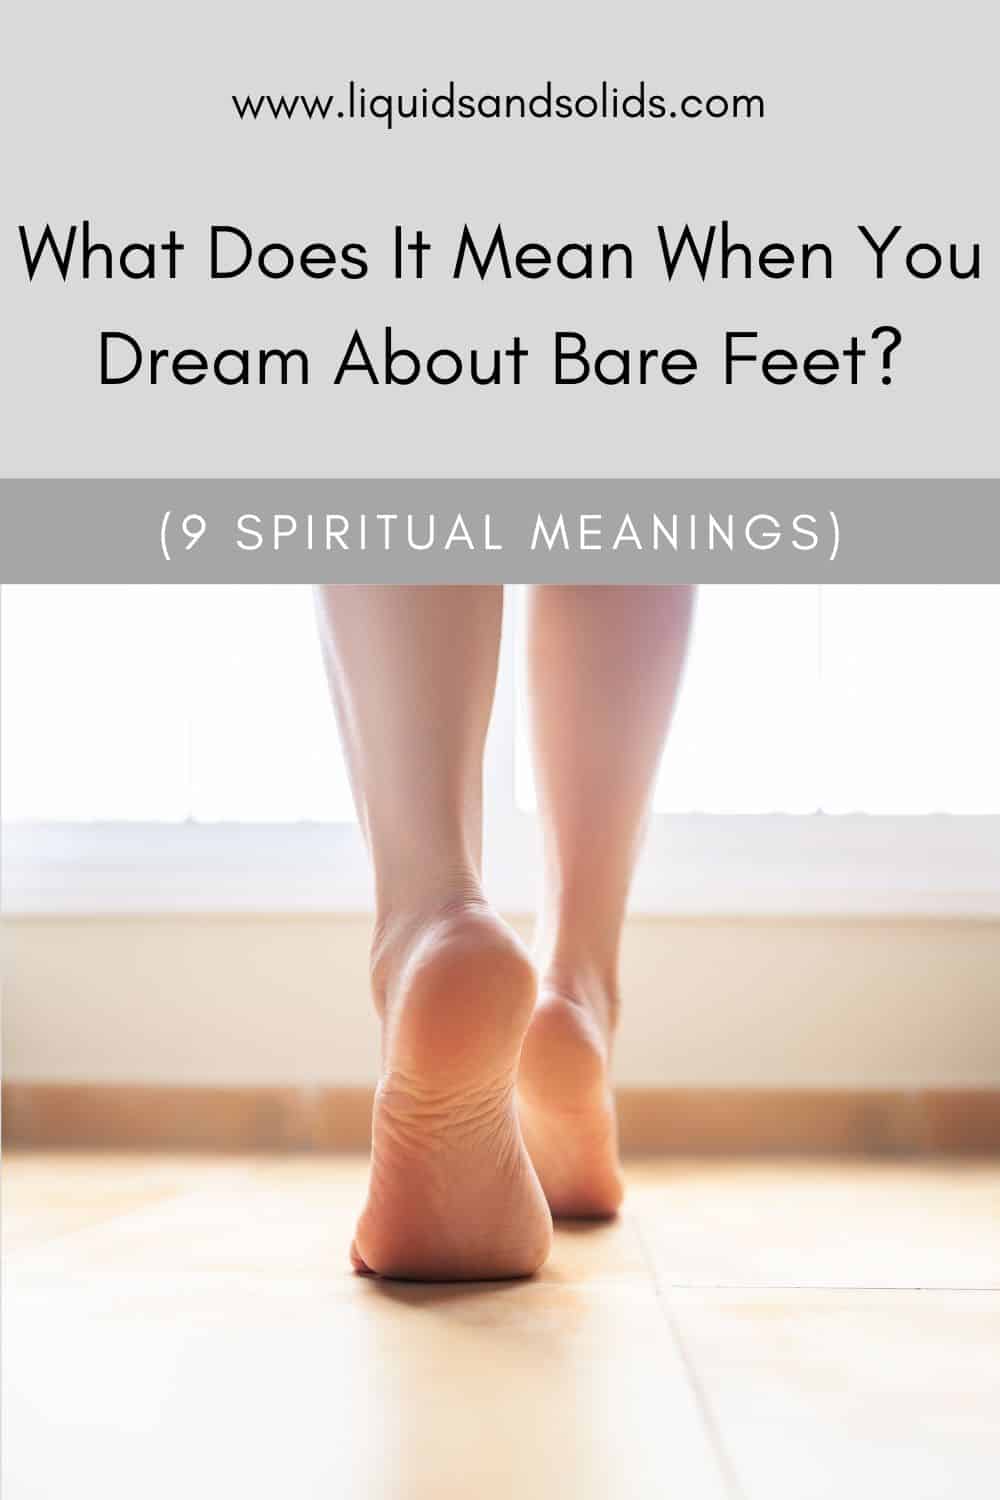 What Does It Mean To Dream Of Bare Feet?